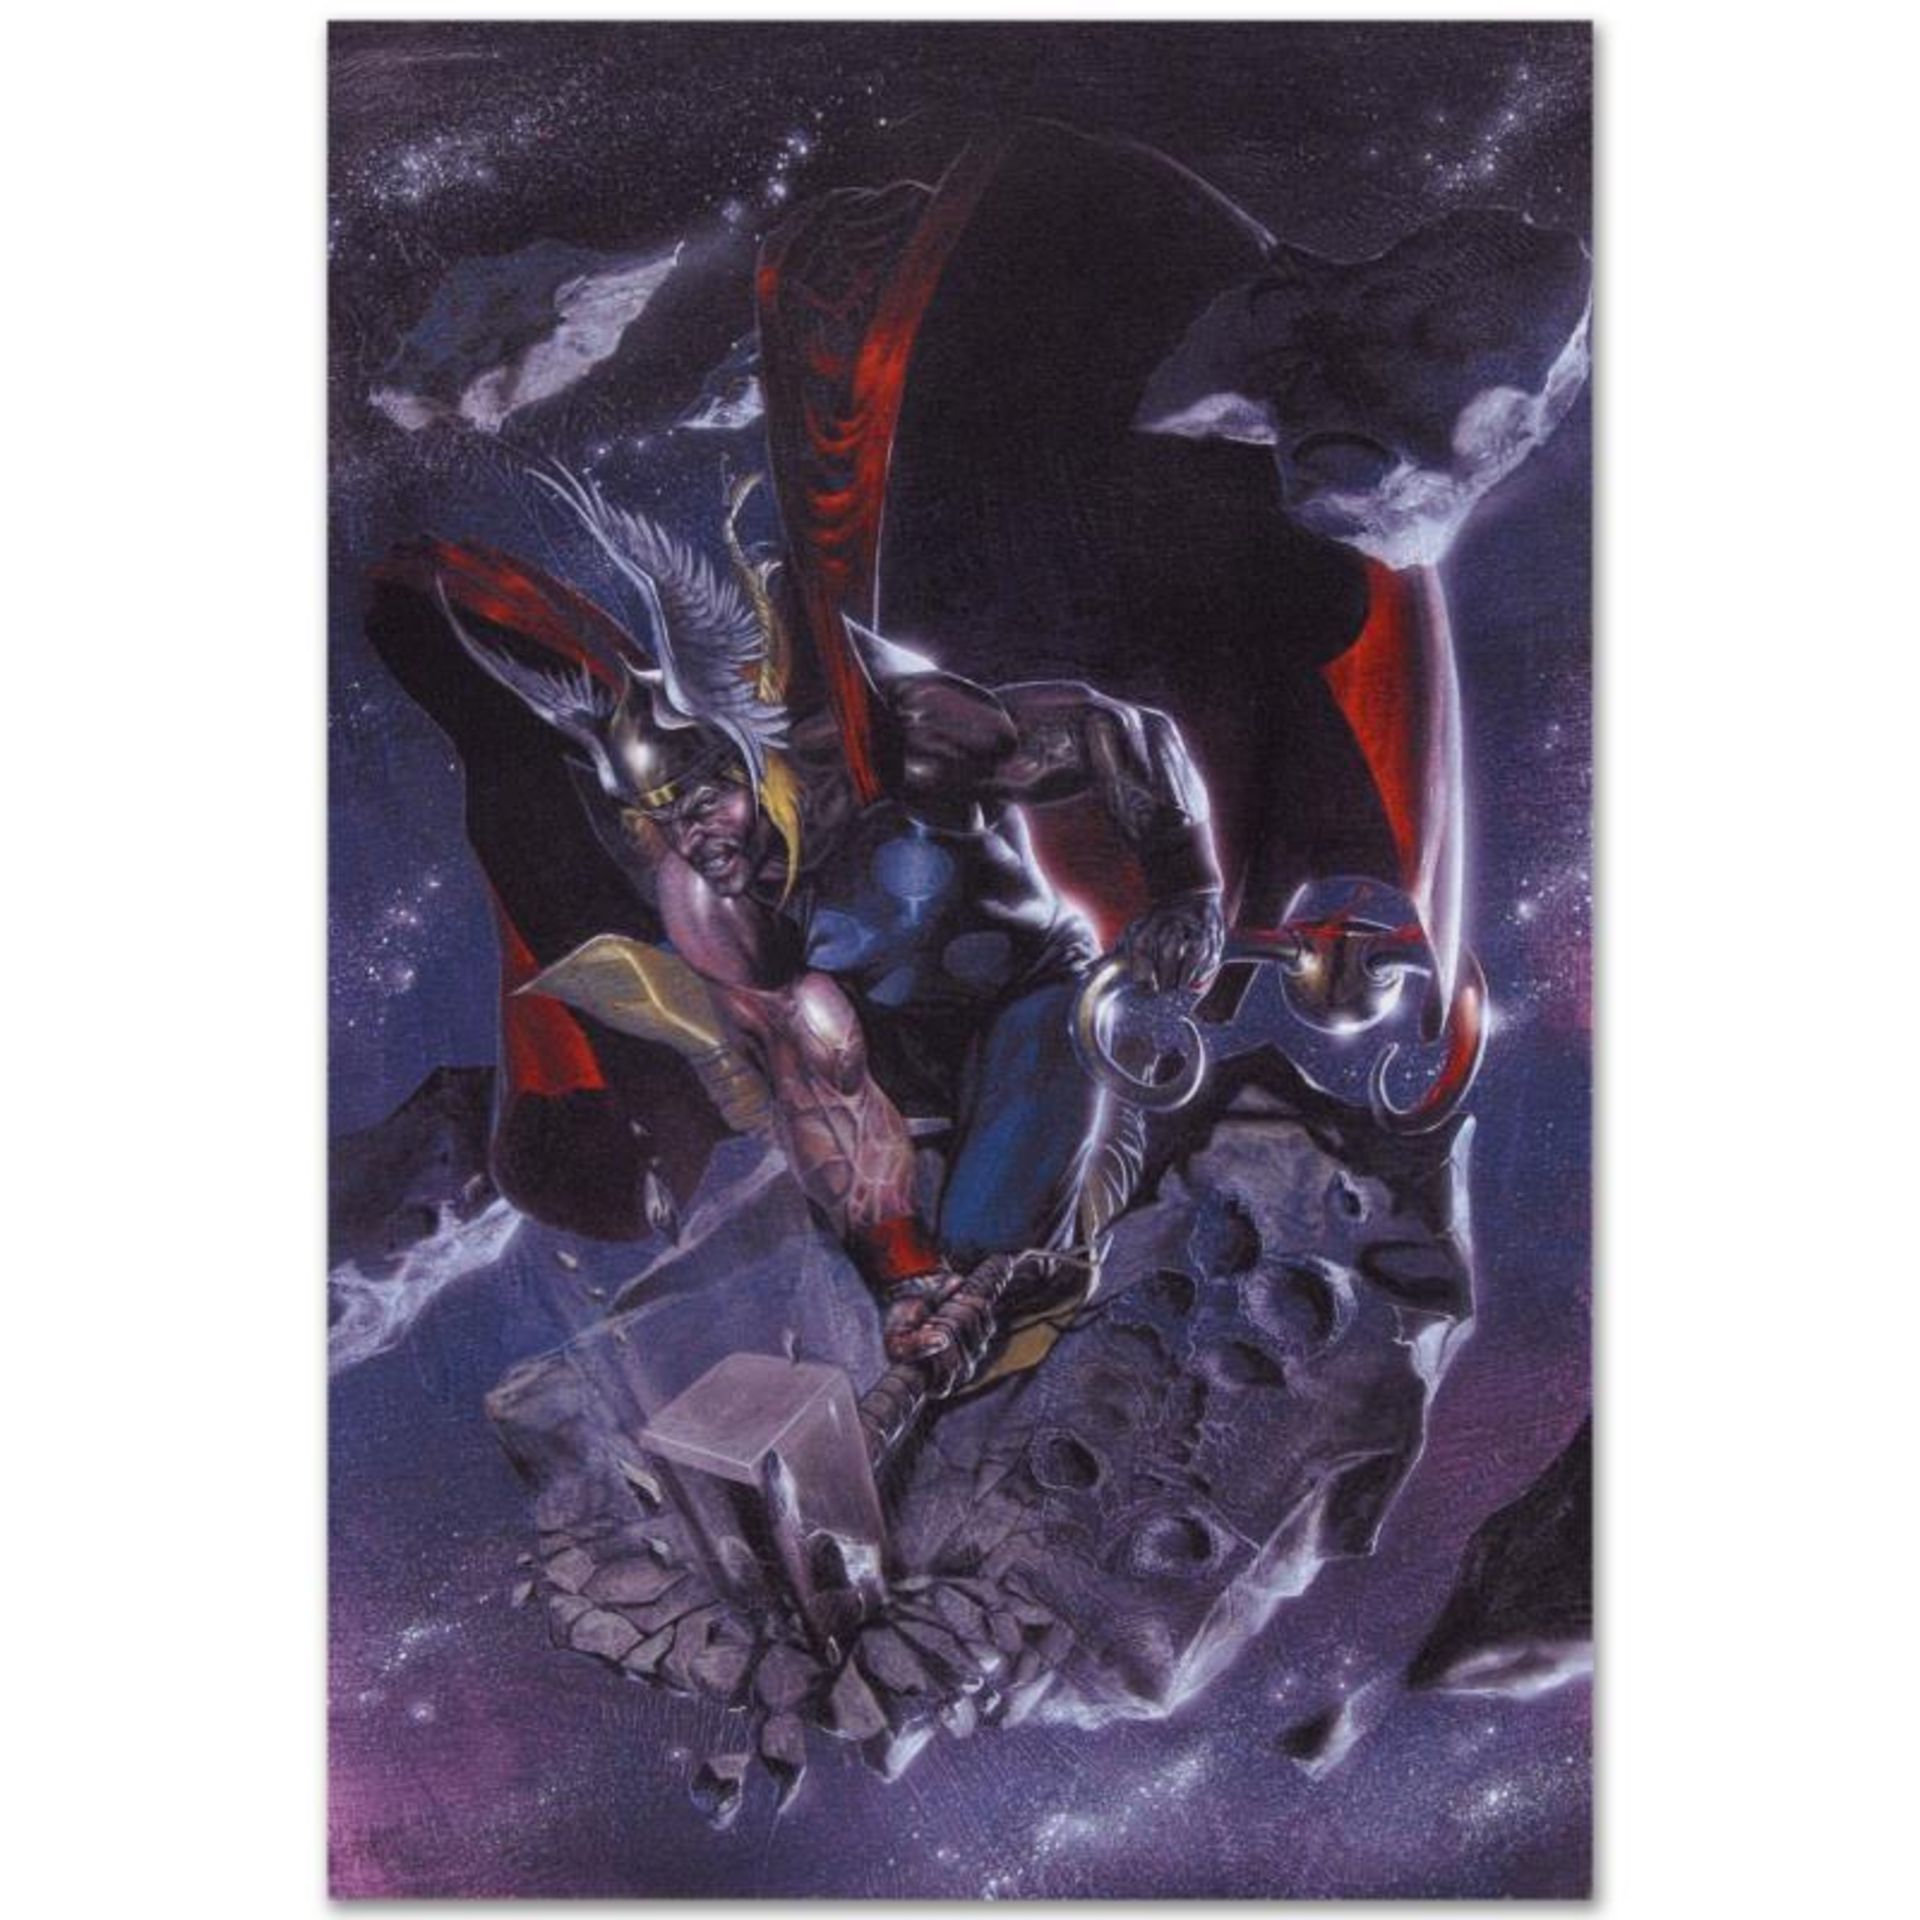 Marvel Comics "Secret War #4" Numbered Limited Edition Giclee on Canvas by Gabri